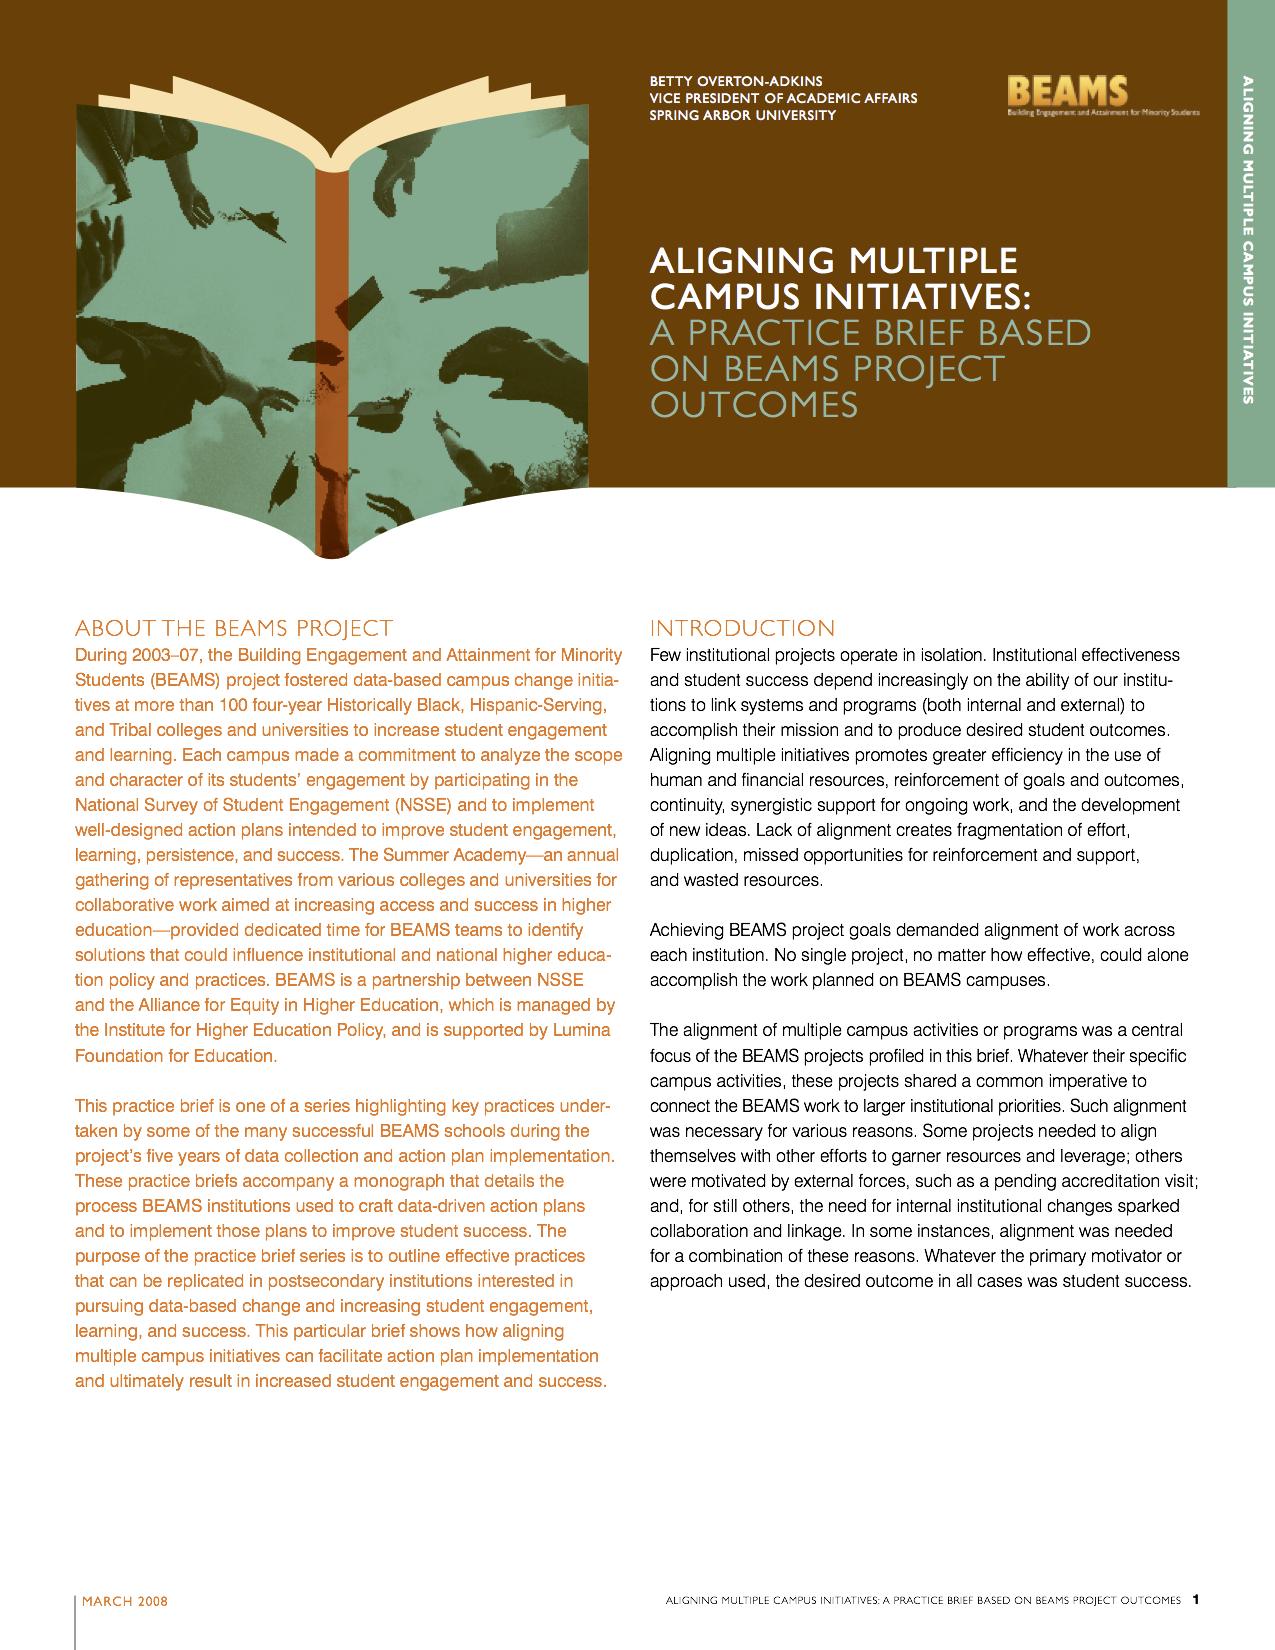 Aligning Multiple Campus Initiatives: A Practice Brief Based on BEAMS Project Outcomes